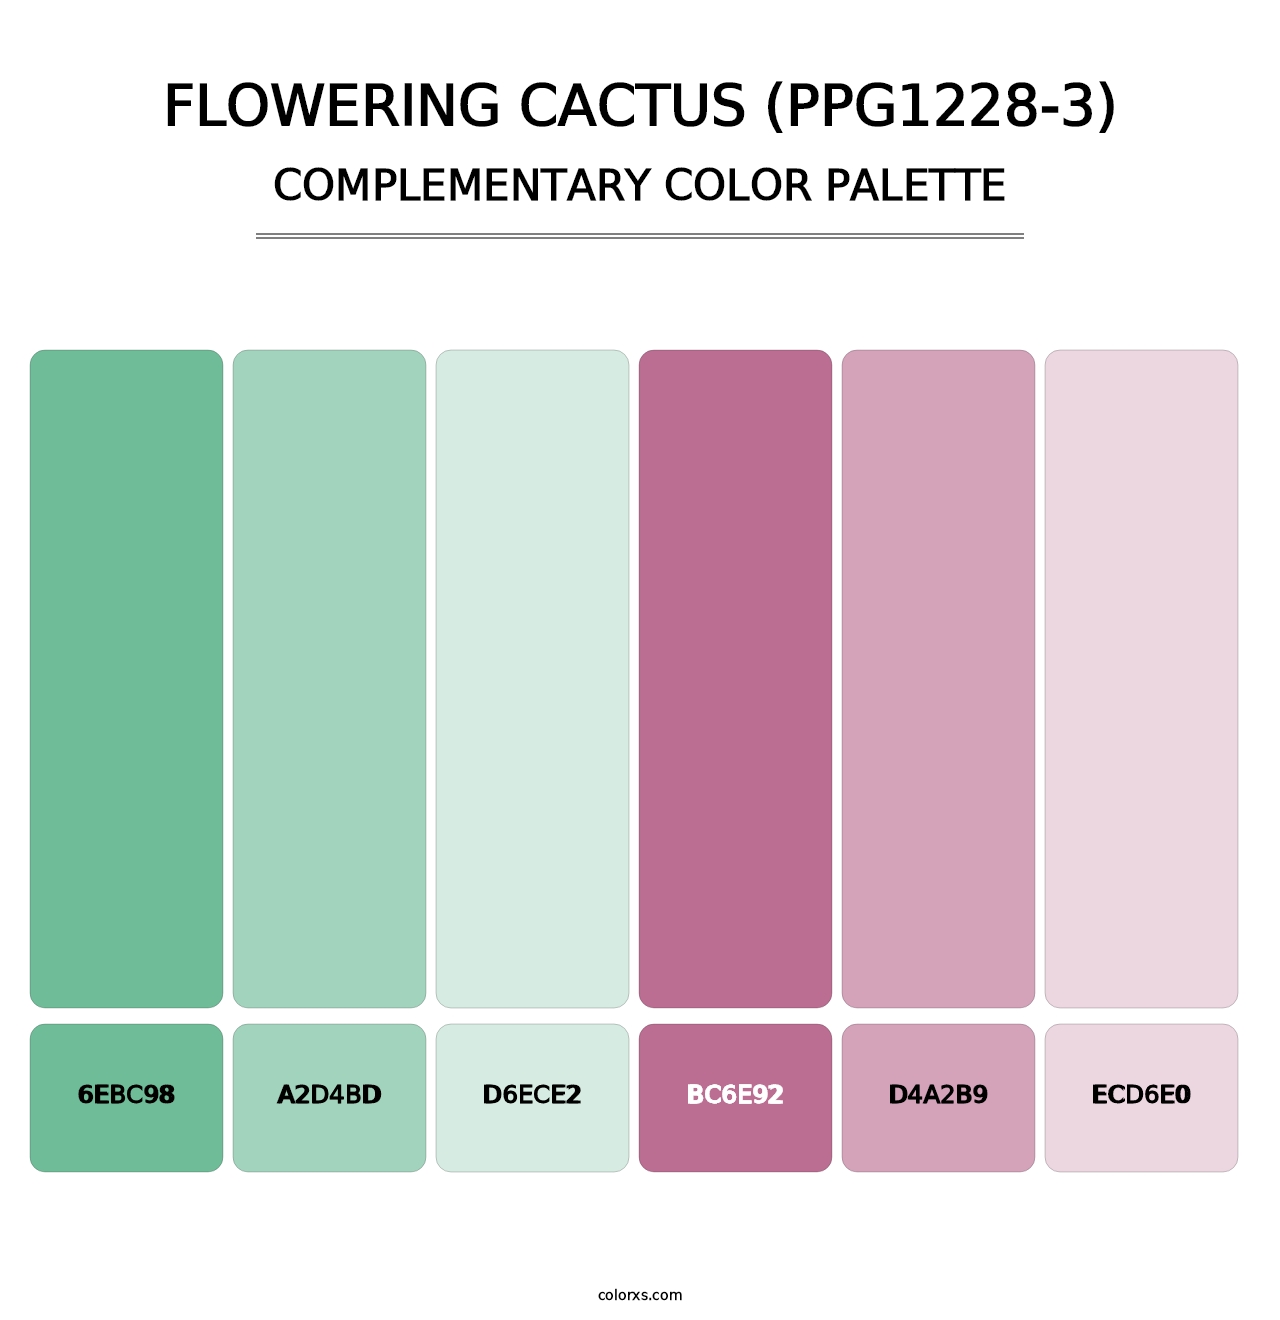 Flowering Cactus (PPG1228-3) - Complementary Color Palette